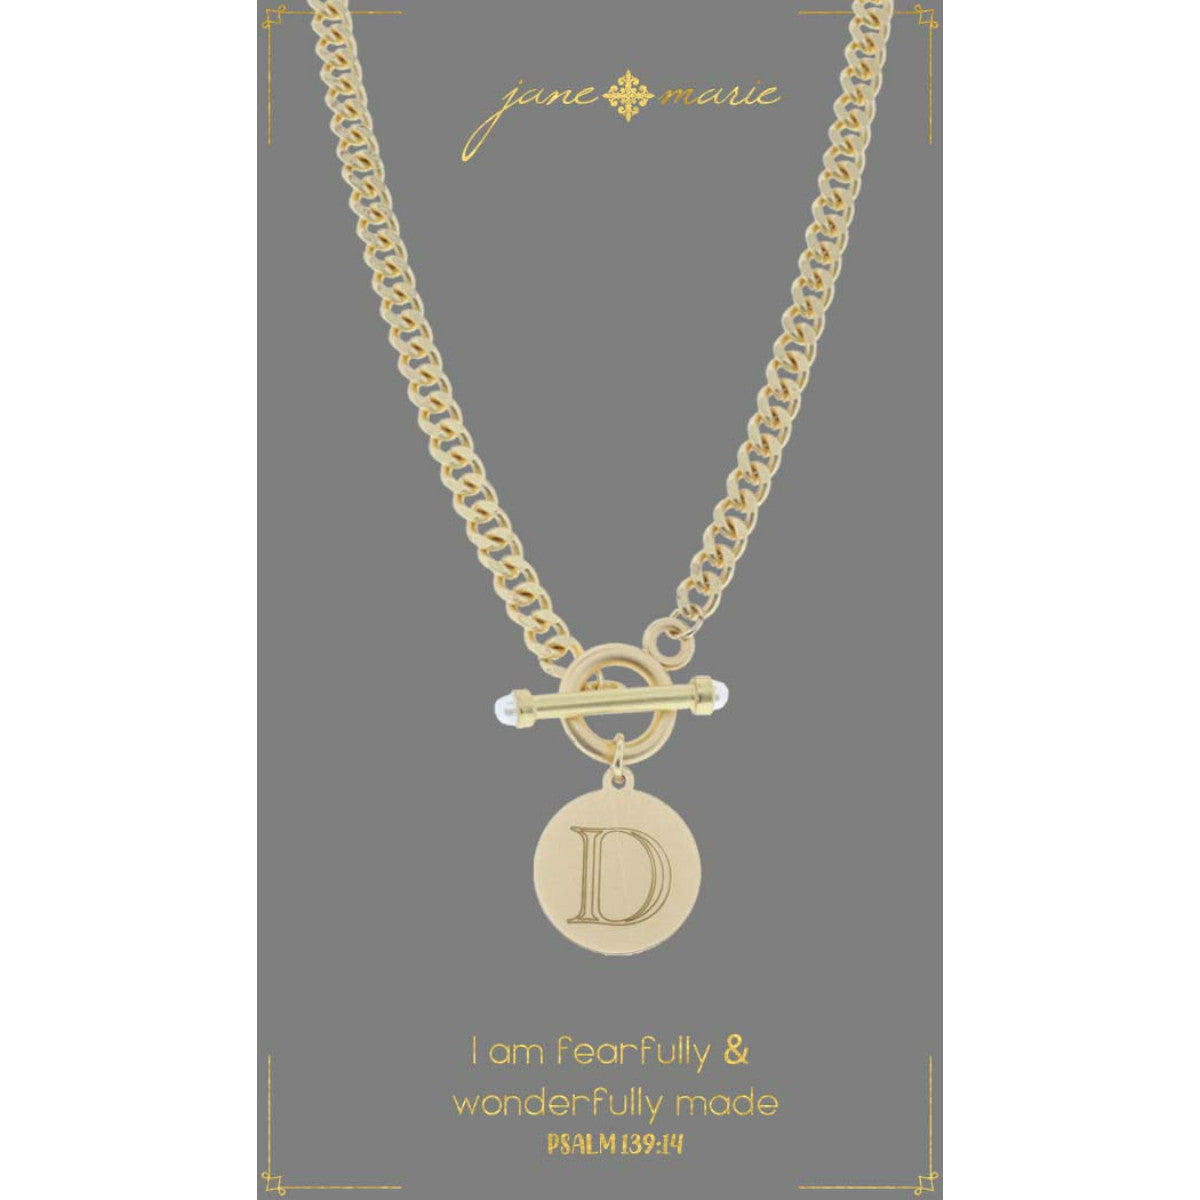 "d" stamped letter necklace on a gray display card on a white background